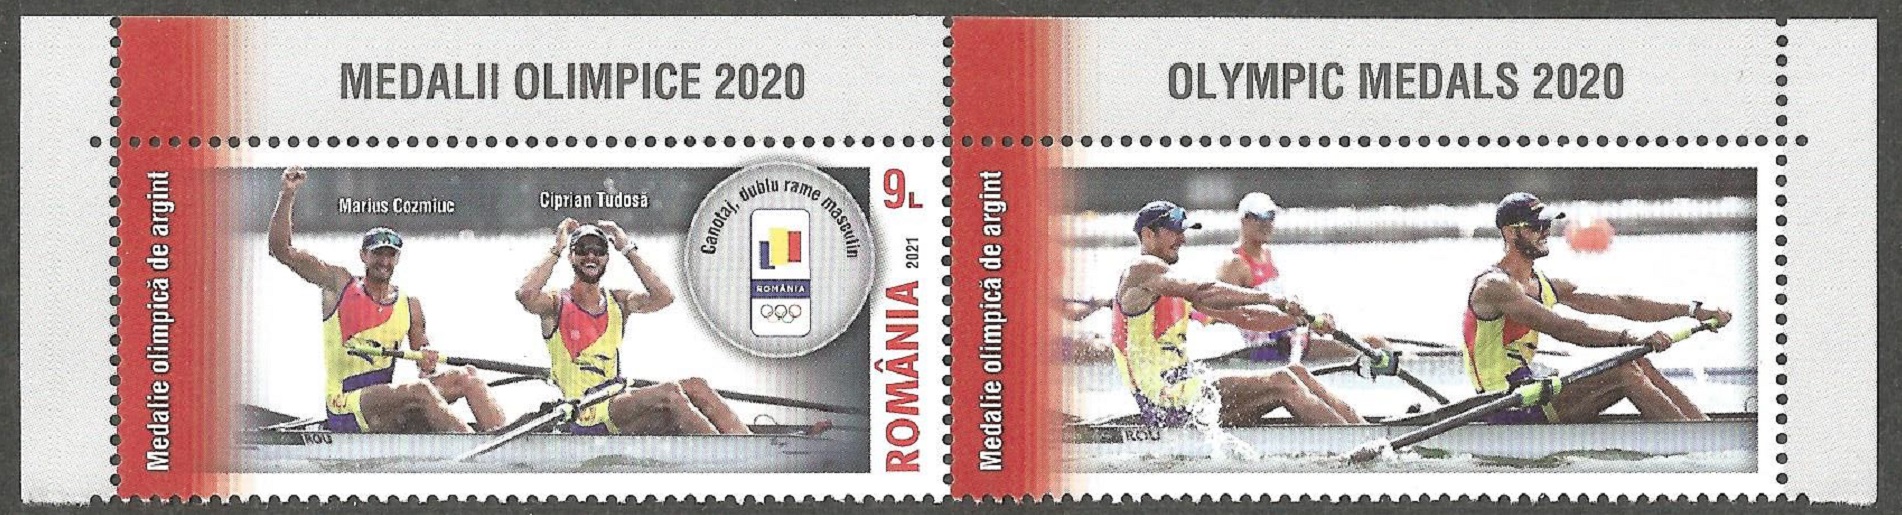 Stamp ROU 2021 Aug. 18th OG Tokyo 2020 with tab Marius Cozmiuc Ciprian Tudosa ROU winners of the M2 silver medal